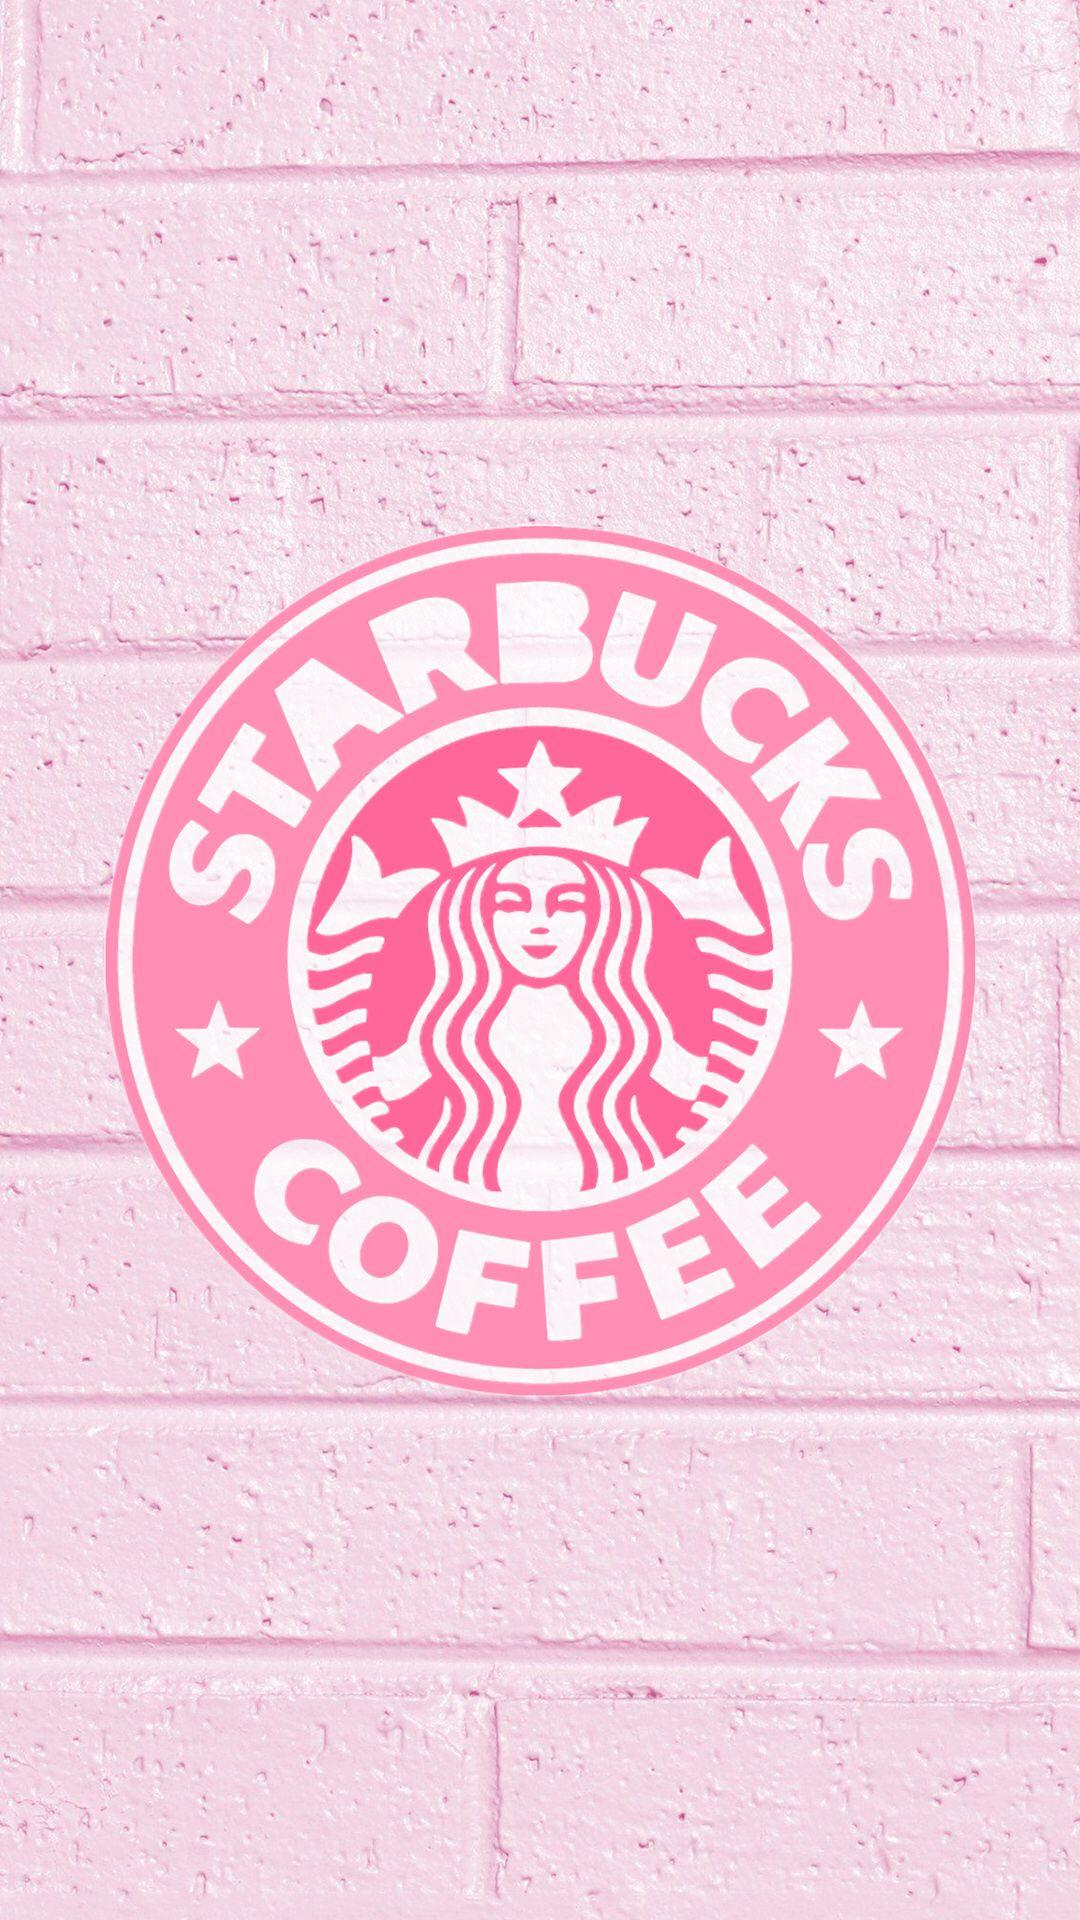 Girly Starbucks Logo - Pin by ℳegan Hartwig❥ on Click. Save. Screen Saver. in 2019 ...